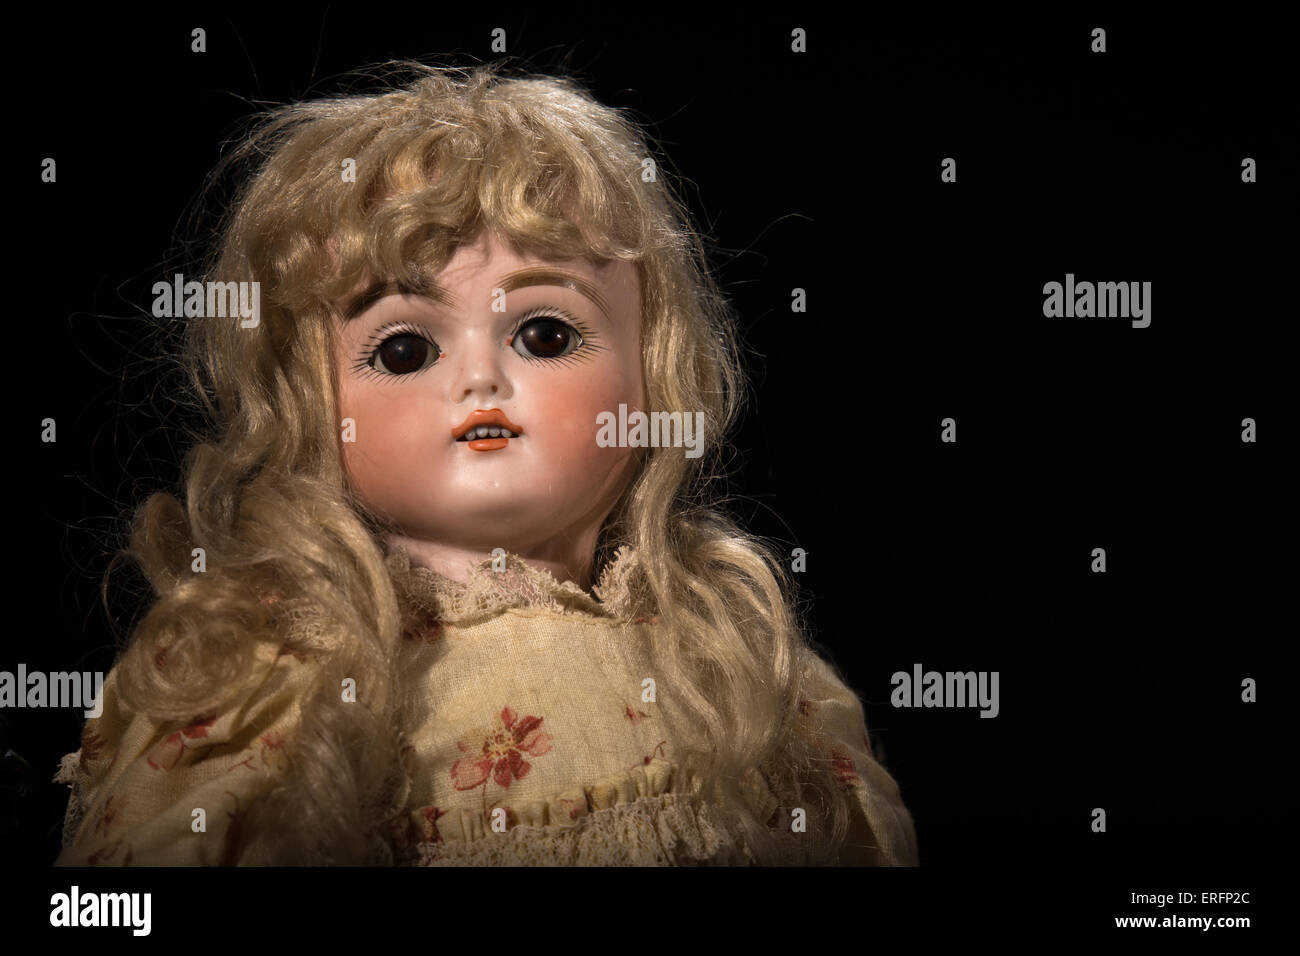 Bisque doll (Porcelain doll Stock Photo - Alamy